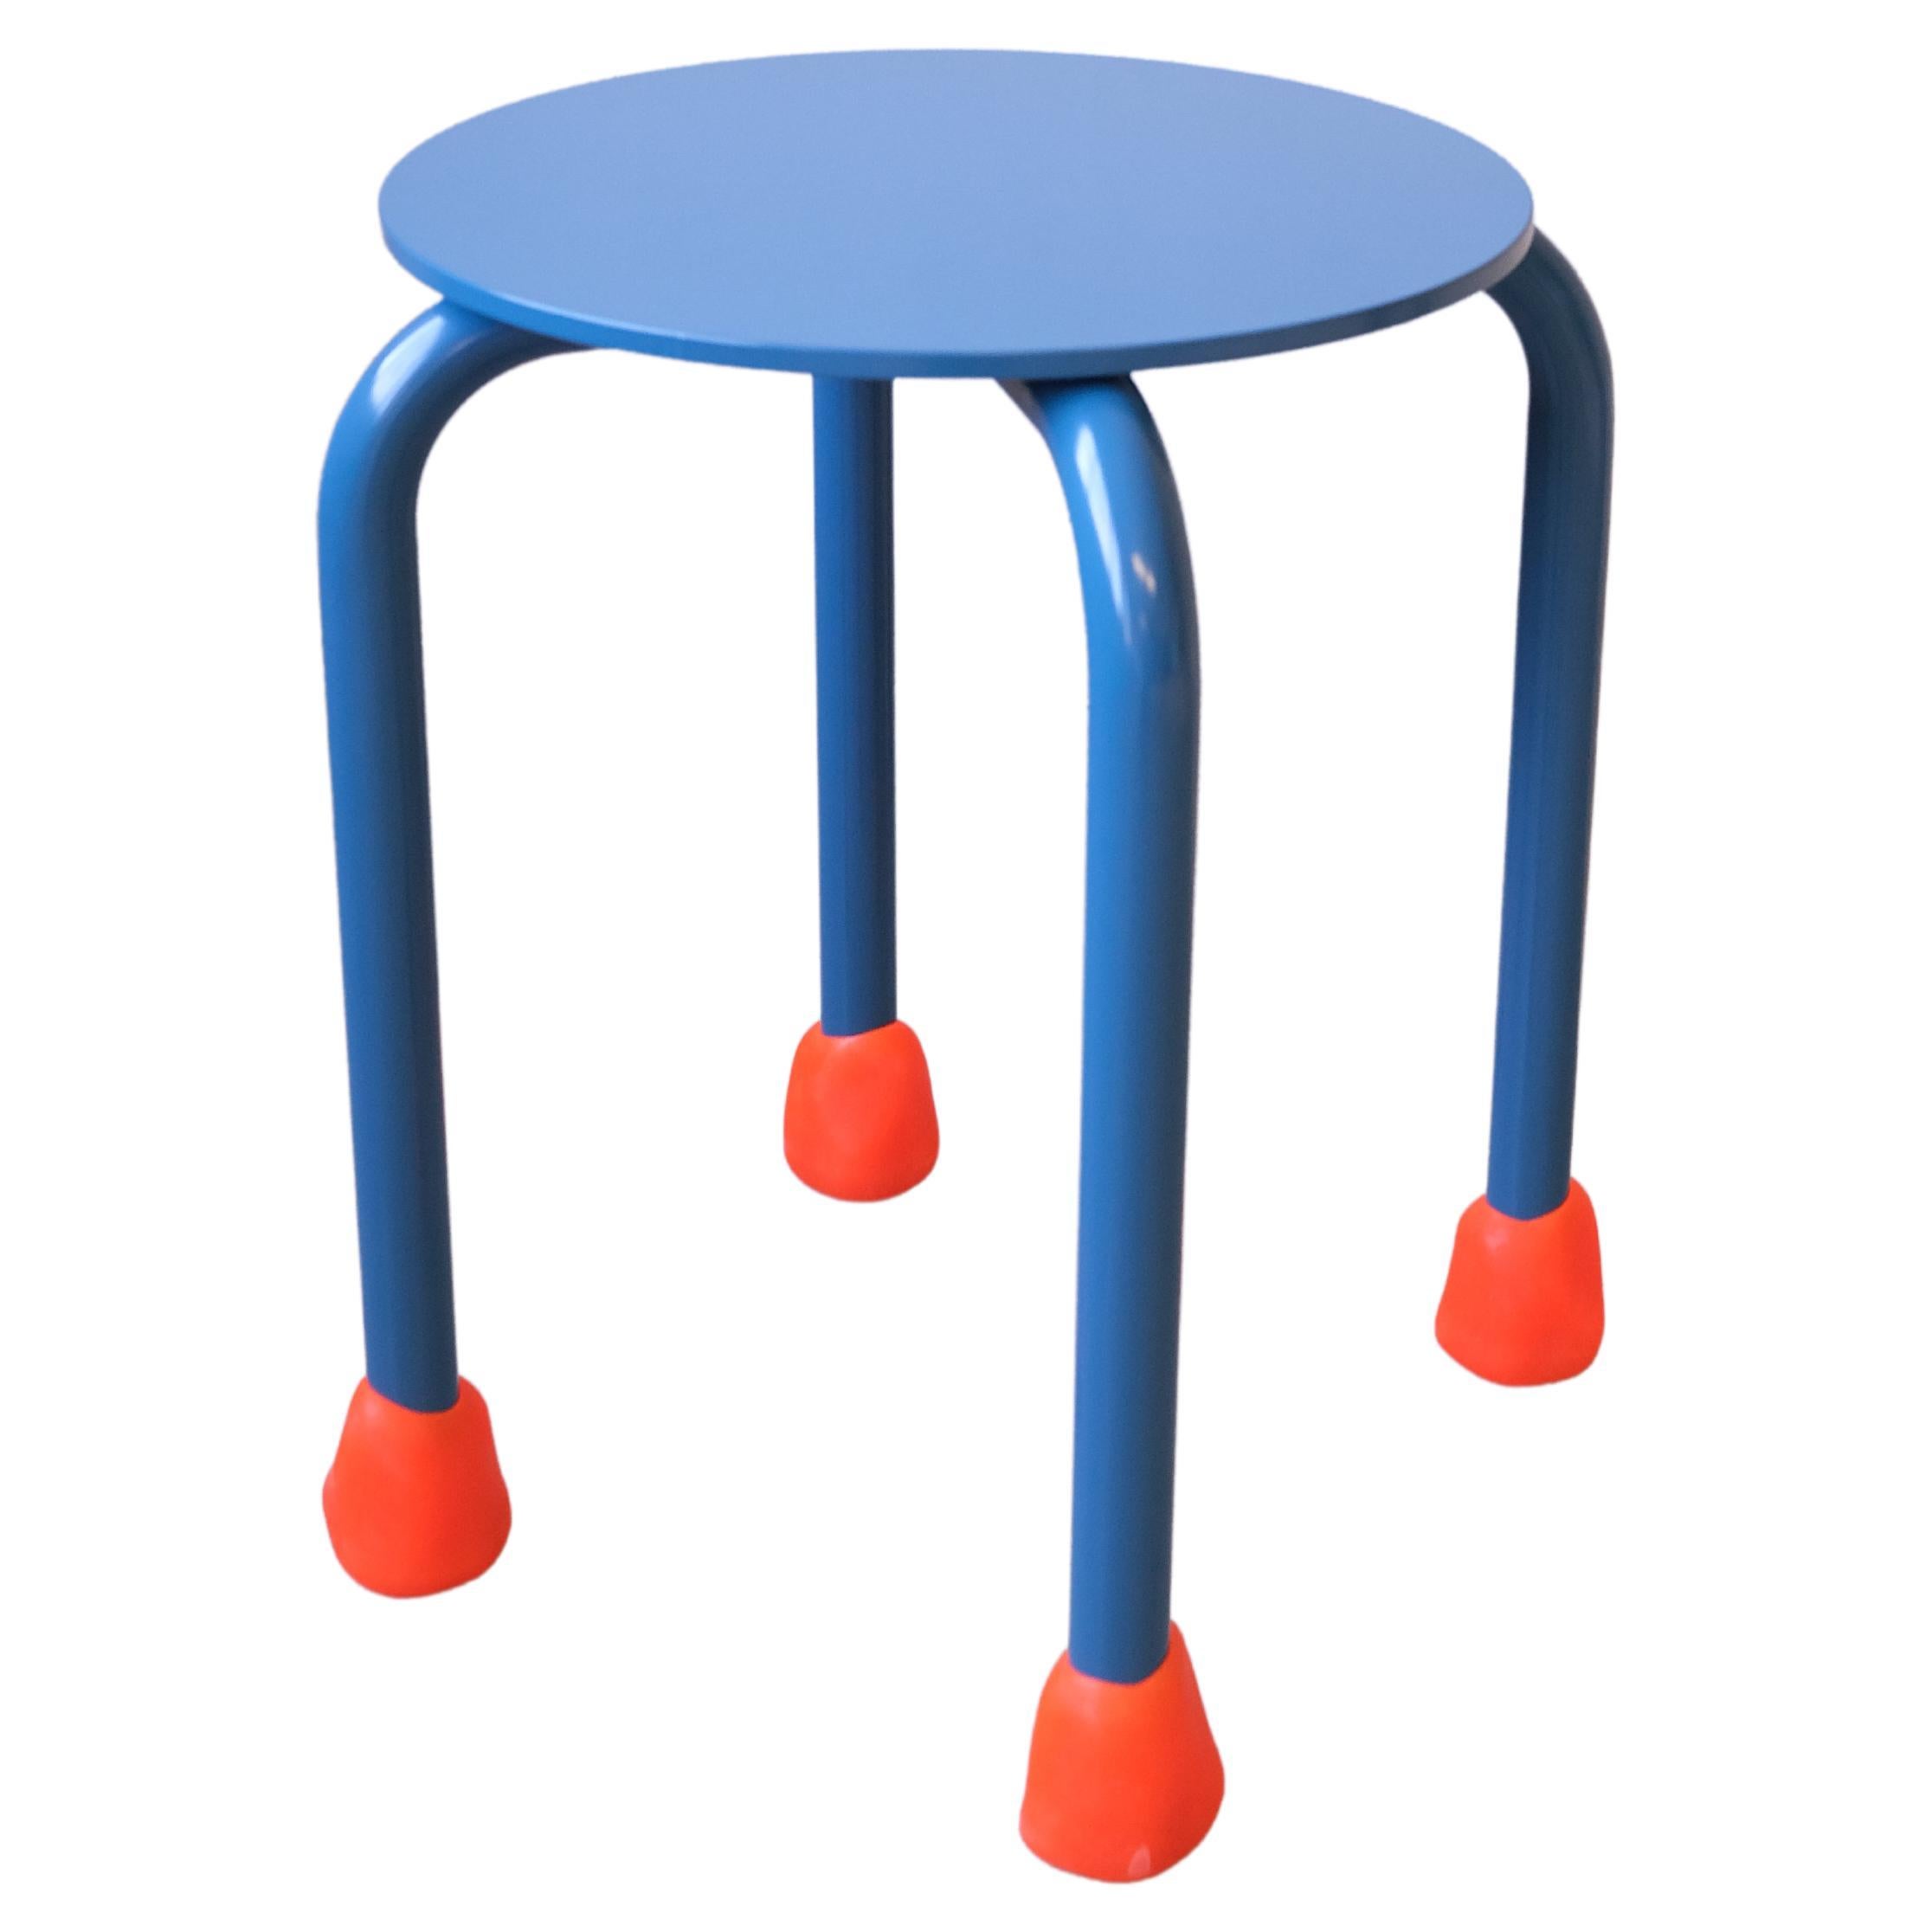 Aluminum Contemporary Blue Stool, Casted Rubber Feets in Neon Orange For Sale